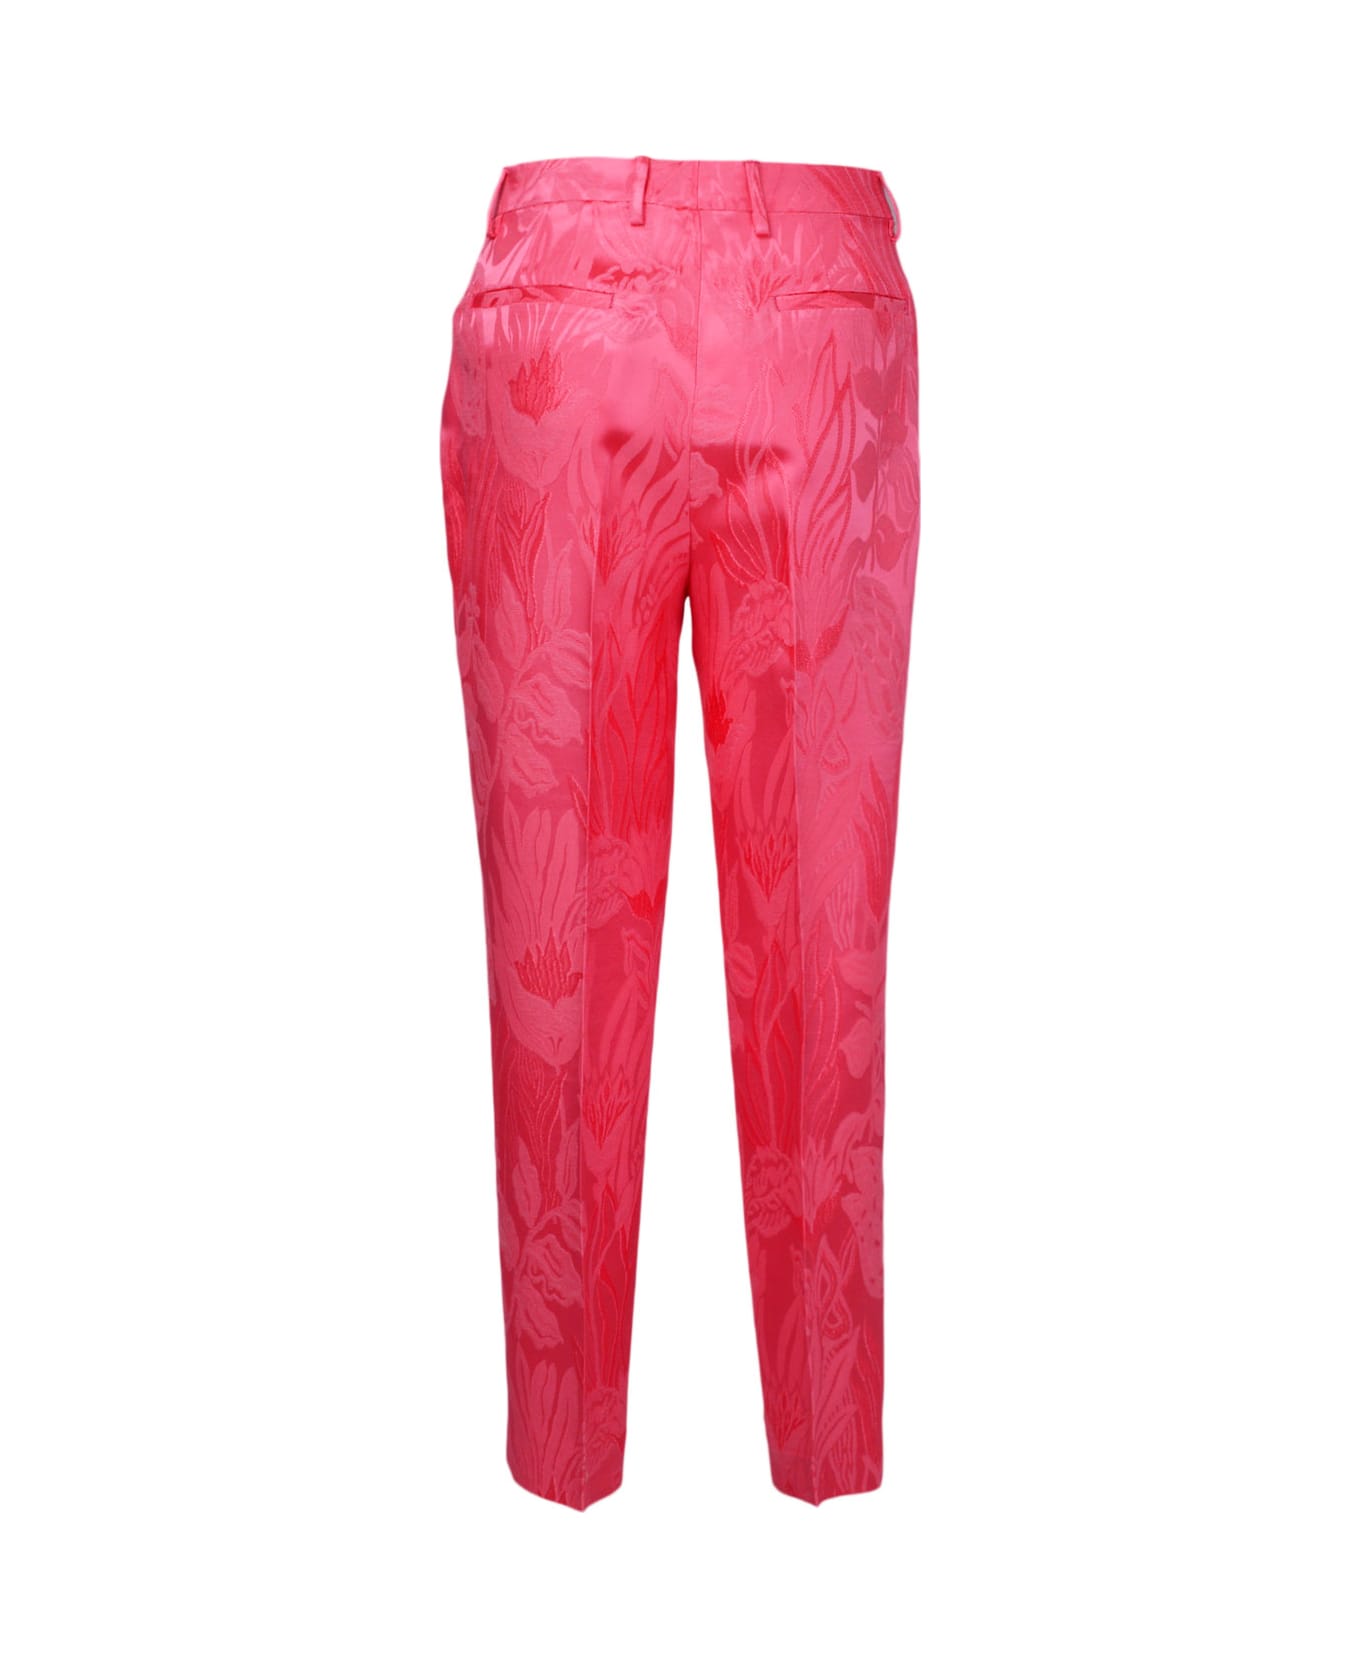 Etro Tailored Floral Jacquard Trousers - Red